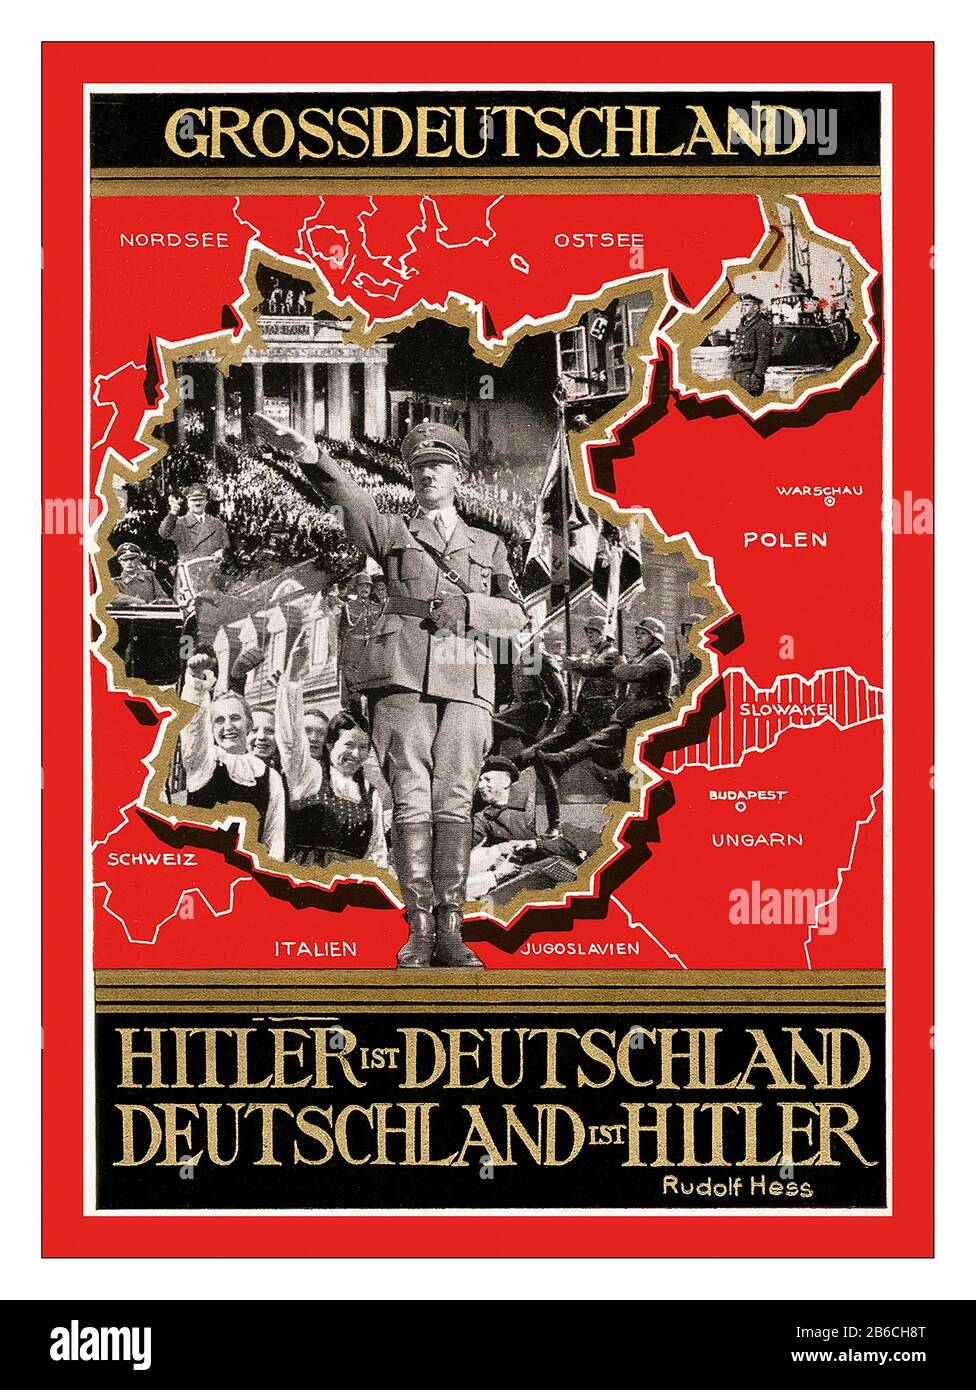 ANSCHLUSS Adolf Hitler Poster/Card Map Germany Vintage 1940’s Nazi Propaganda GROSSDEUTSCHLAND Poster/Postcard featuring Adolf Hitler saluting wearing military uniform with Swastika armband surrounded by images of military parades and might and adoring crowds 'All of Germany' “ Hitler is Germany Germany is Hitler.. (Rudolf Hess quote) World War II WW2 Second World War Stock Photo